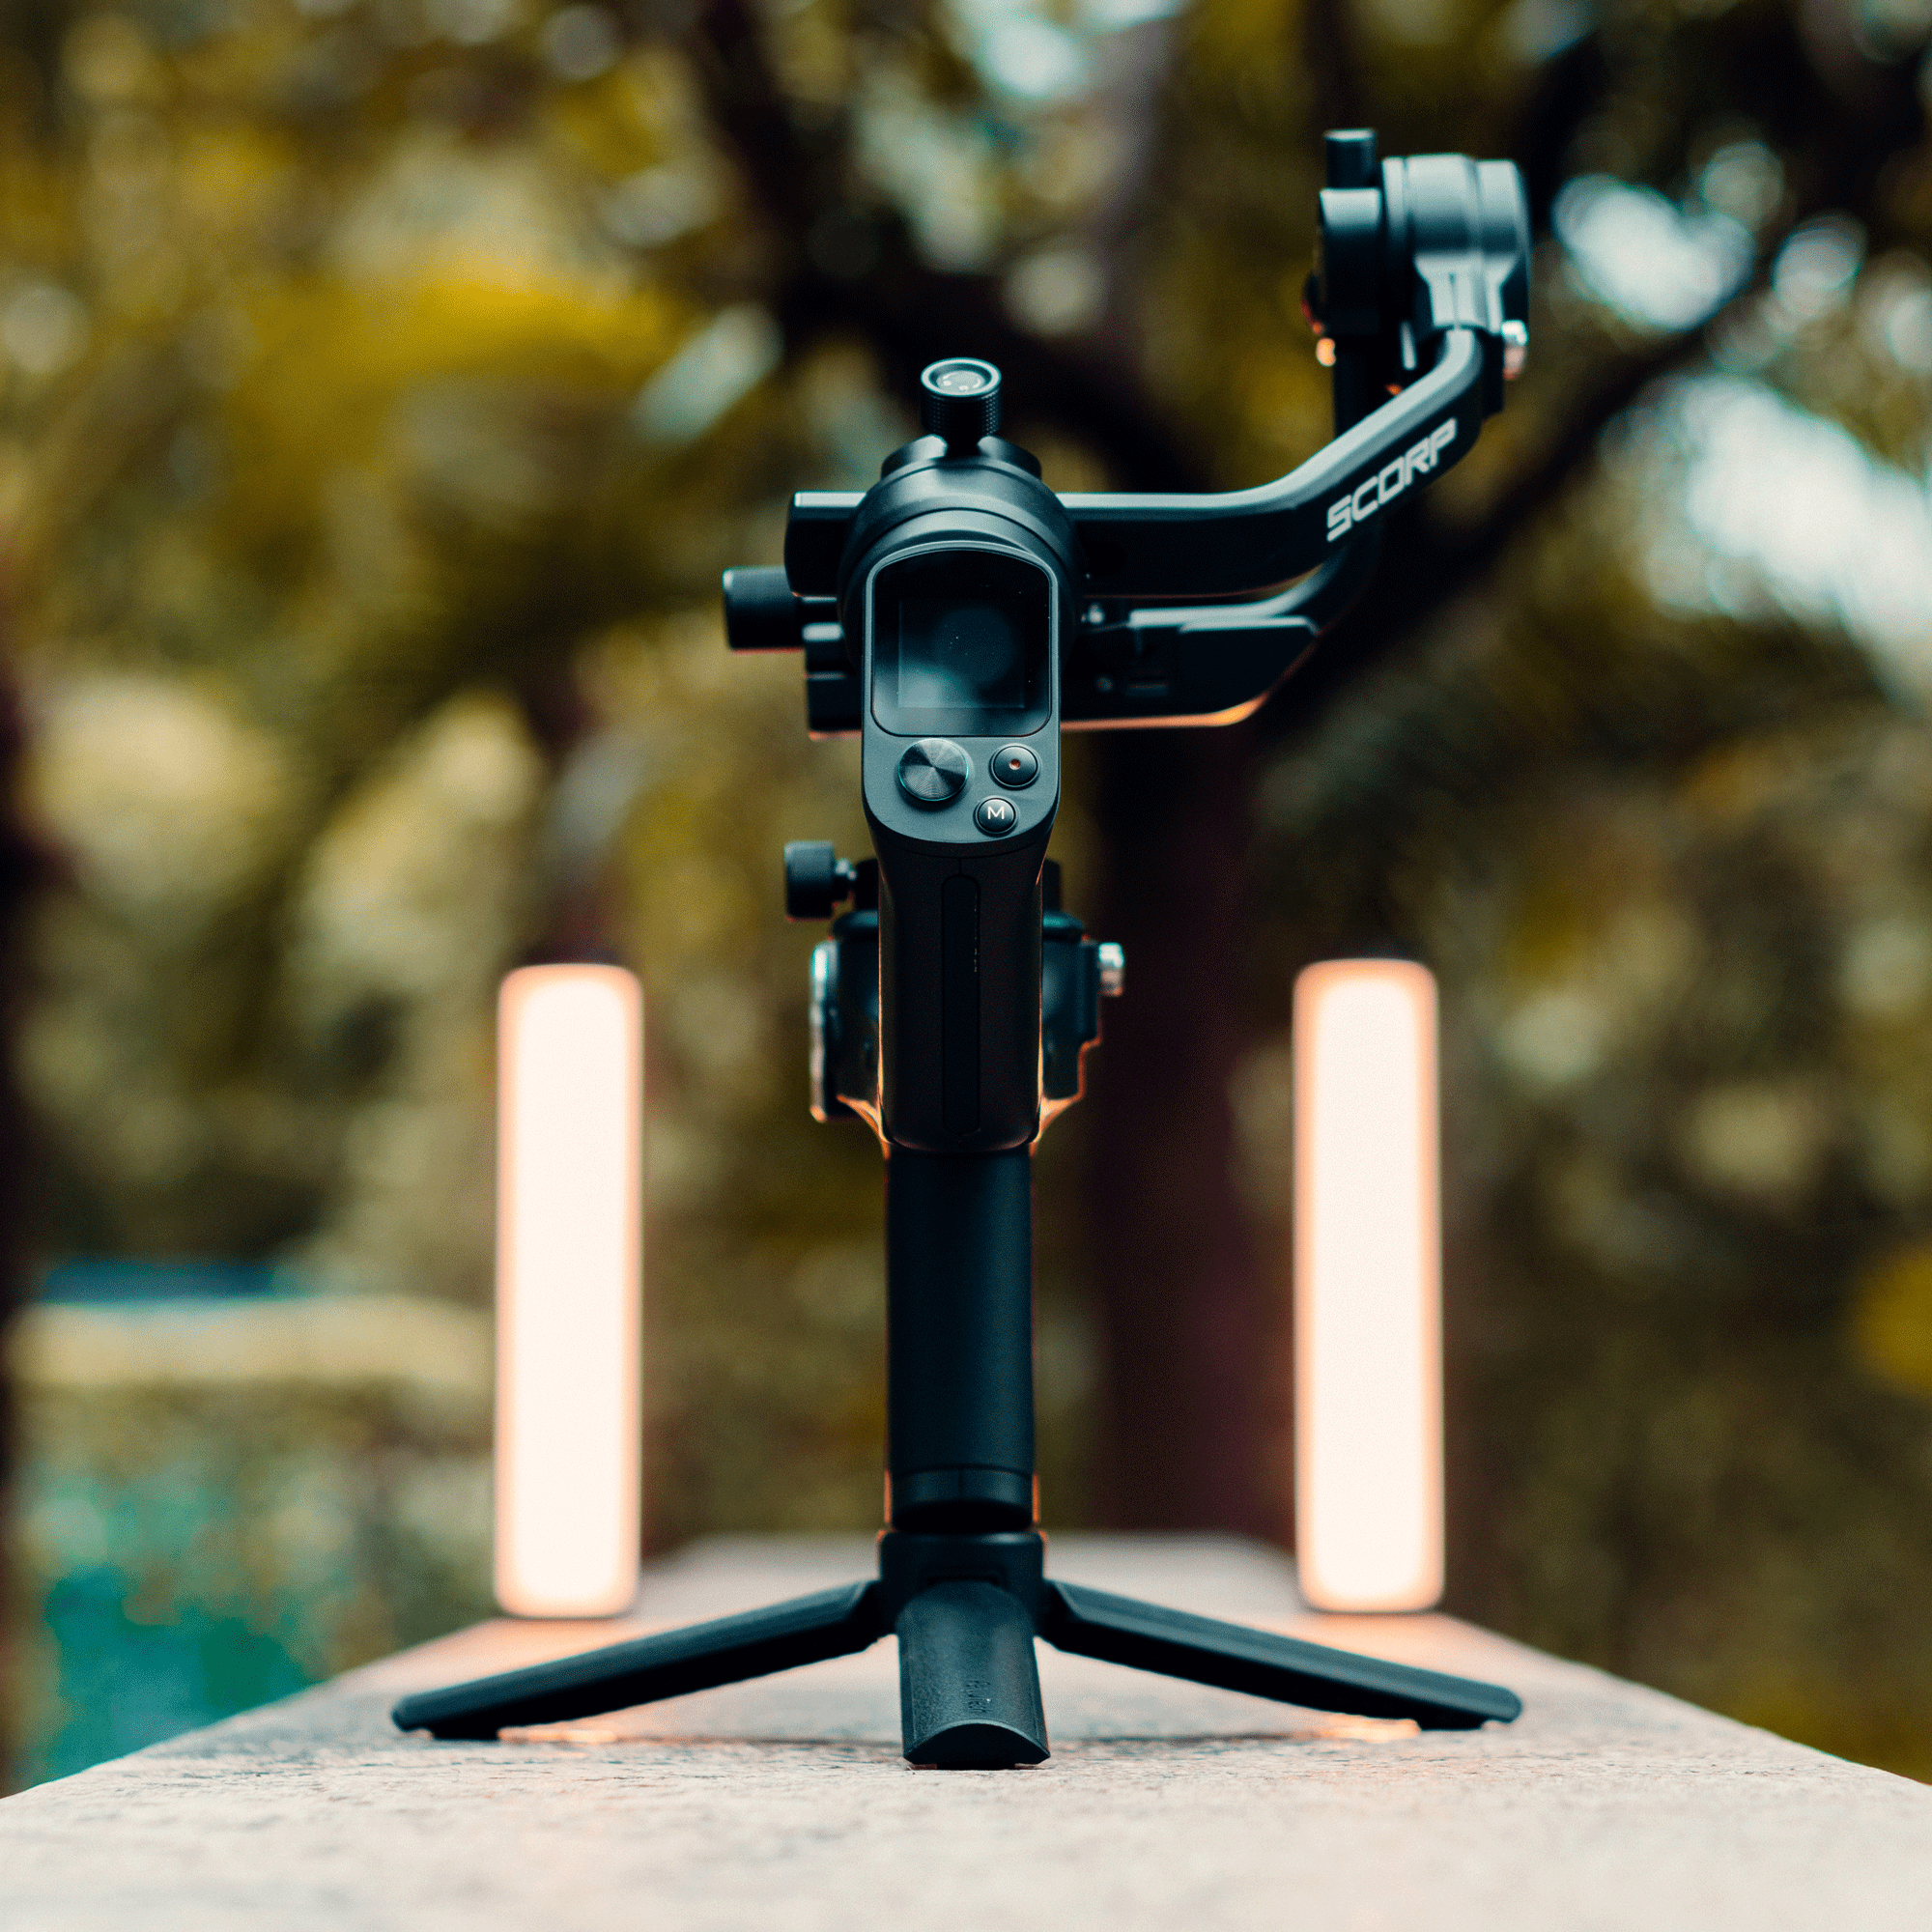 SCORP-C and SCORP Gimbal Stabilizer Comparison